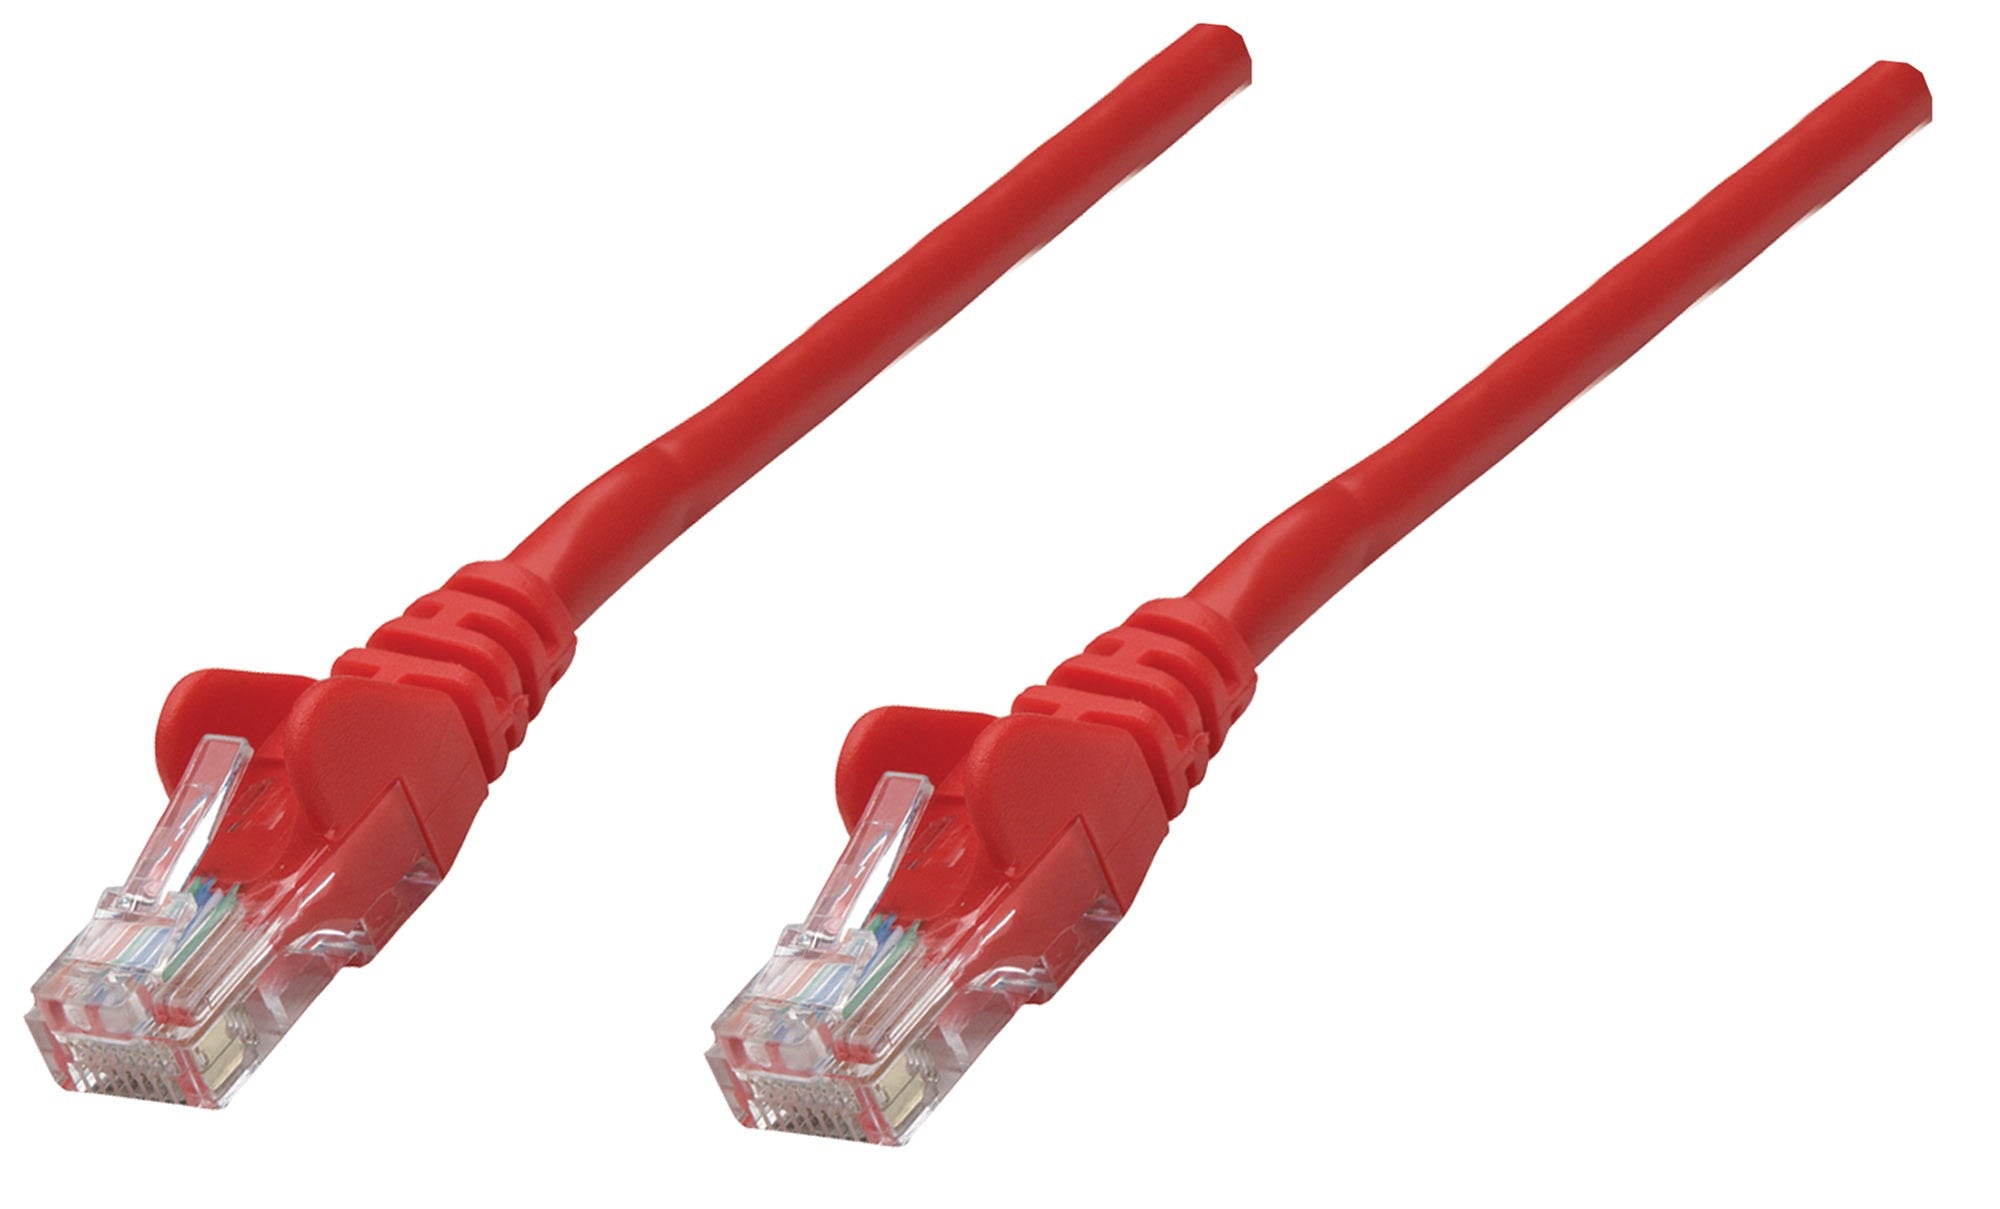 Intellinet Network Patch Cable, Cat6A, 0.25m, Red, Copper, S/FTP, LSOH / LSZH, PVC, RJ45, Gold Plated Contacts, Snagless, Booted, Lifetime Warranty, Polybag